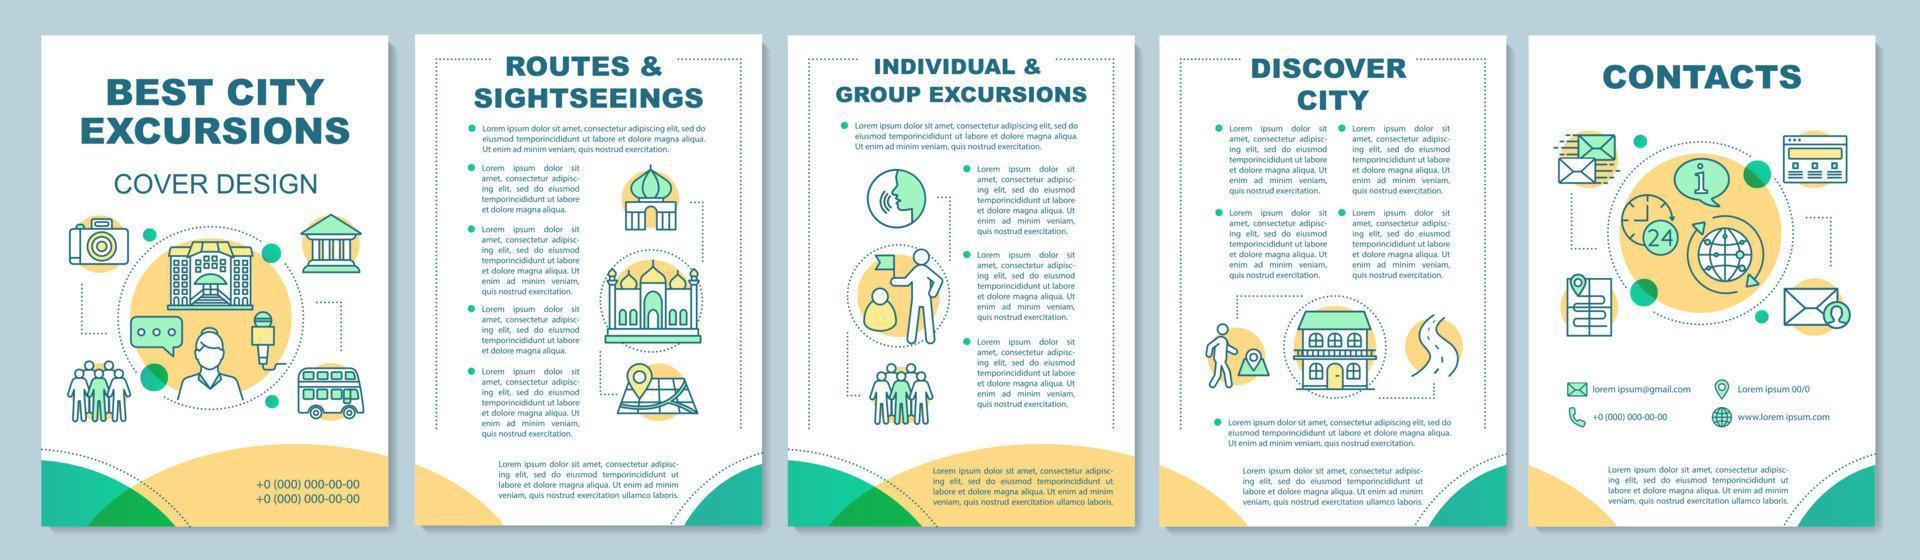 Excursion brochure template layout. City route. Tourism, sightseeing. Flyer, booklet print design with linear illustrations. Vector page layouts for magazines, annual reports, advertising posters